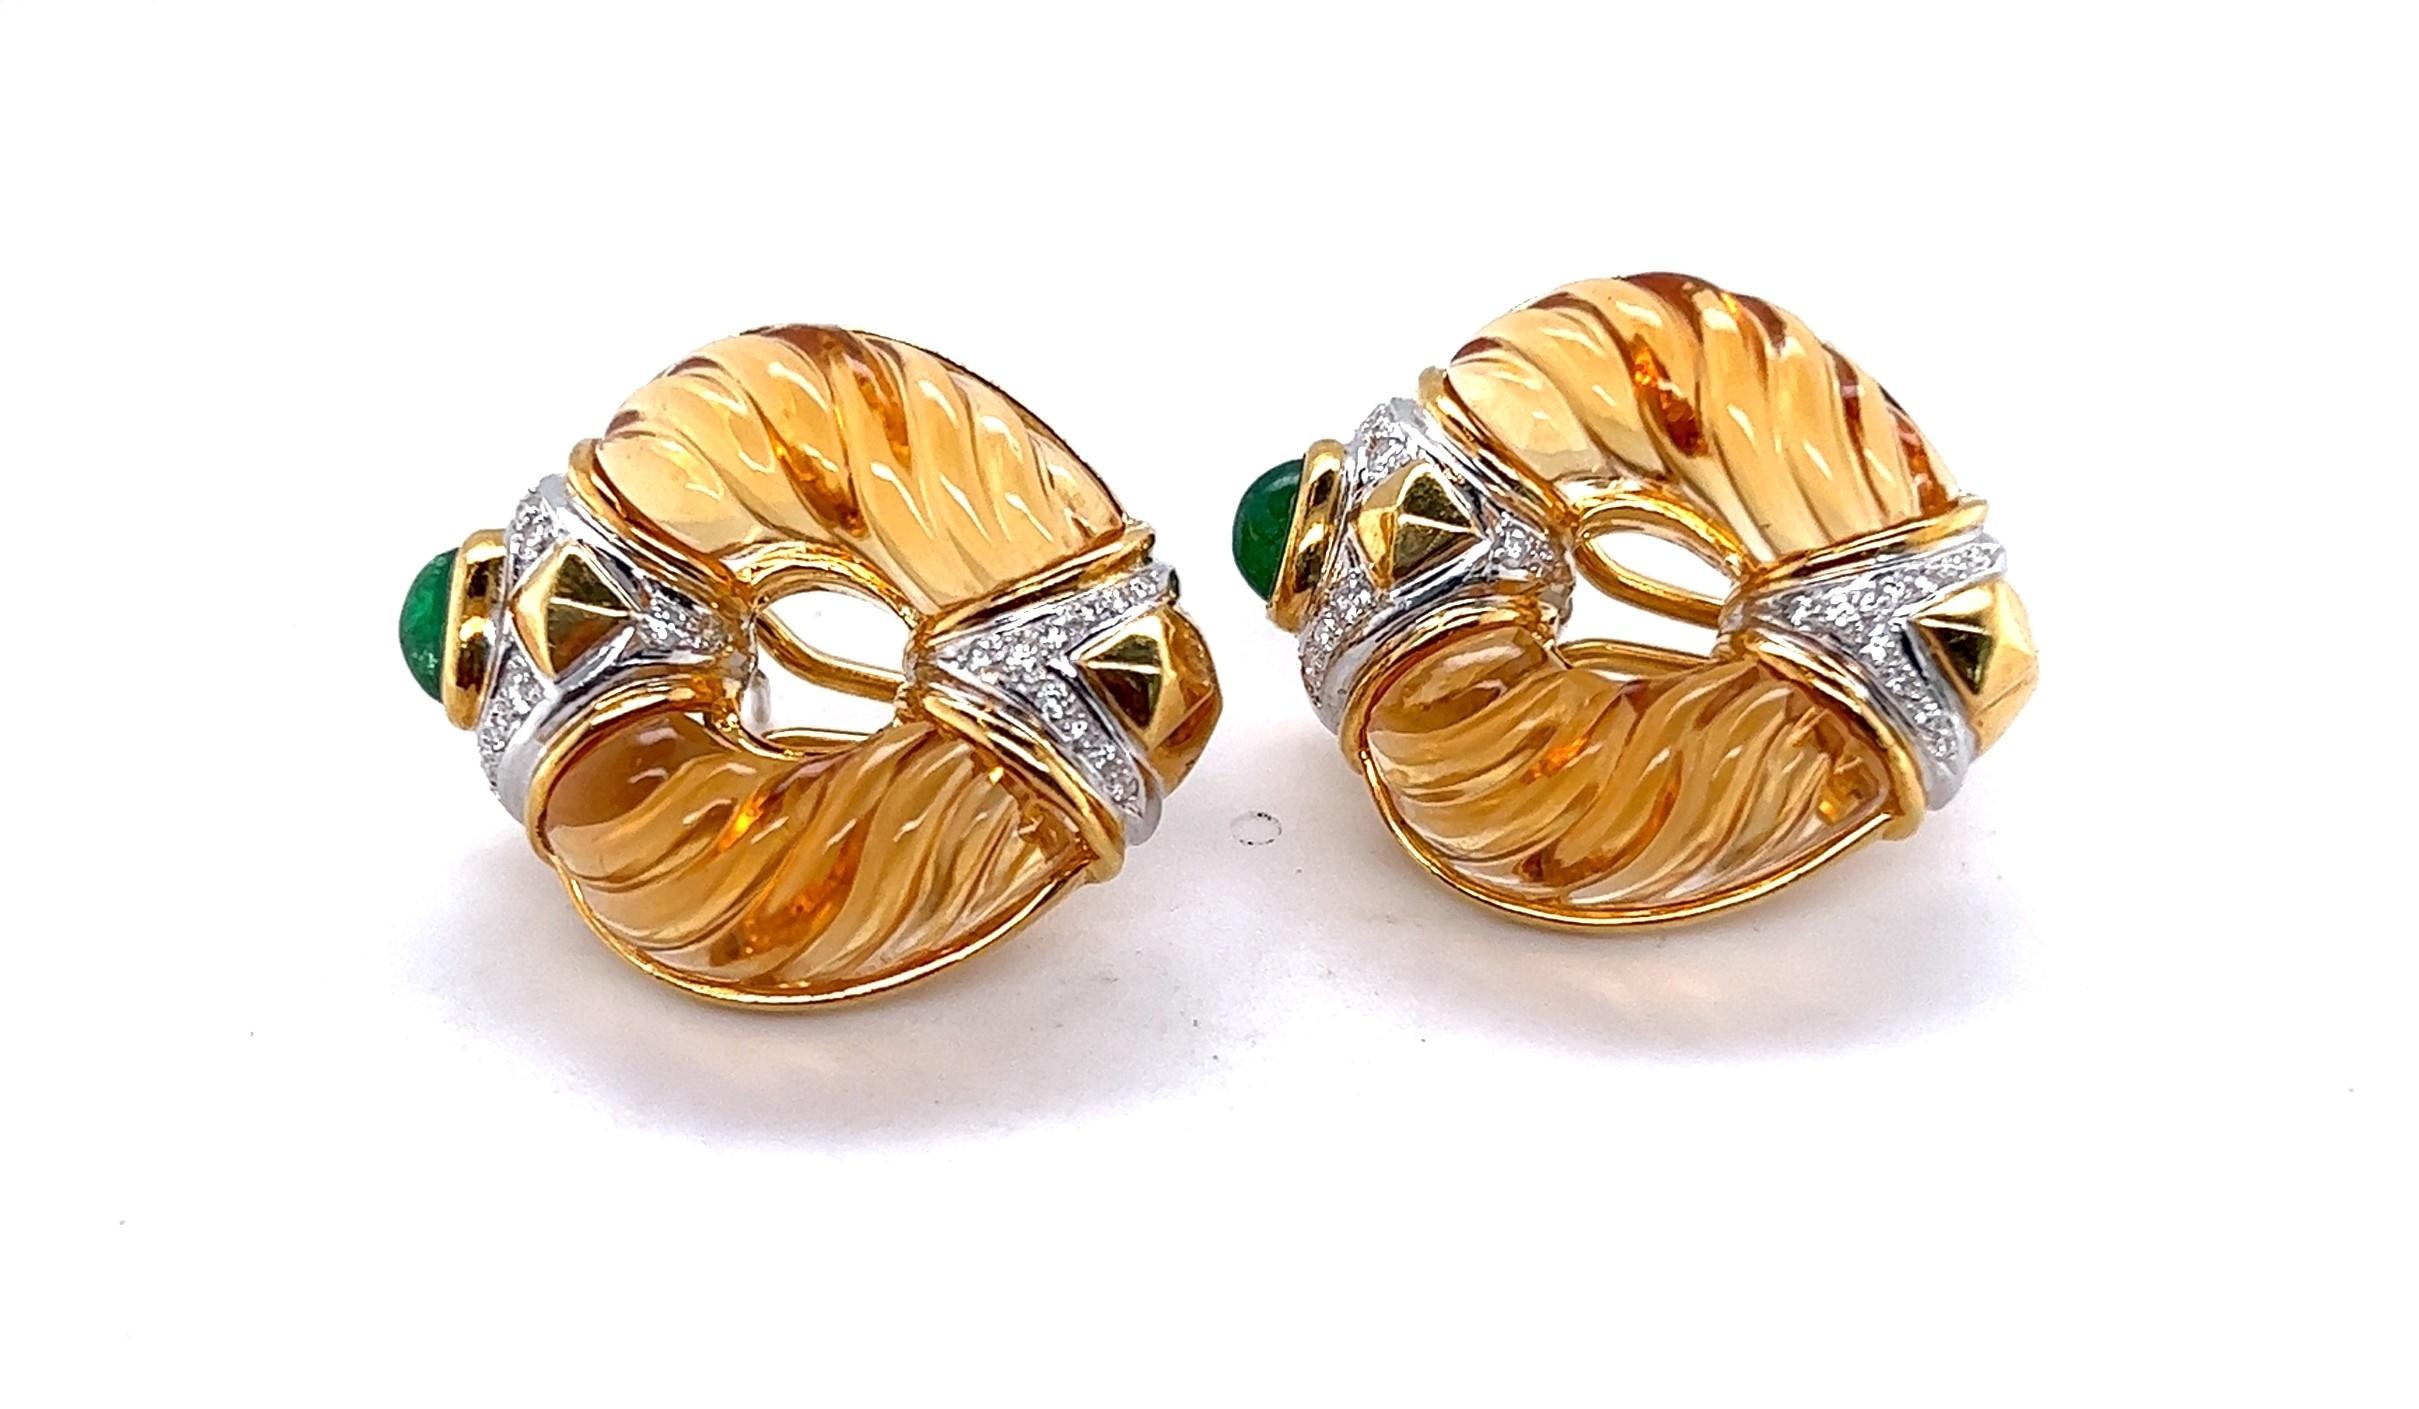 Custom made 14kt yellow gold omega back earrings featuring hand carved Citrines, emerald cabochons and diamonds set in 18kt white gold. The diamonds weigh approximately .24 carats and possess an average of G-H color/ VS2-SI1 clarity. 

These